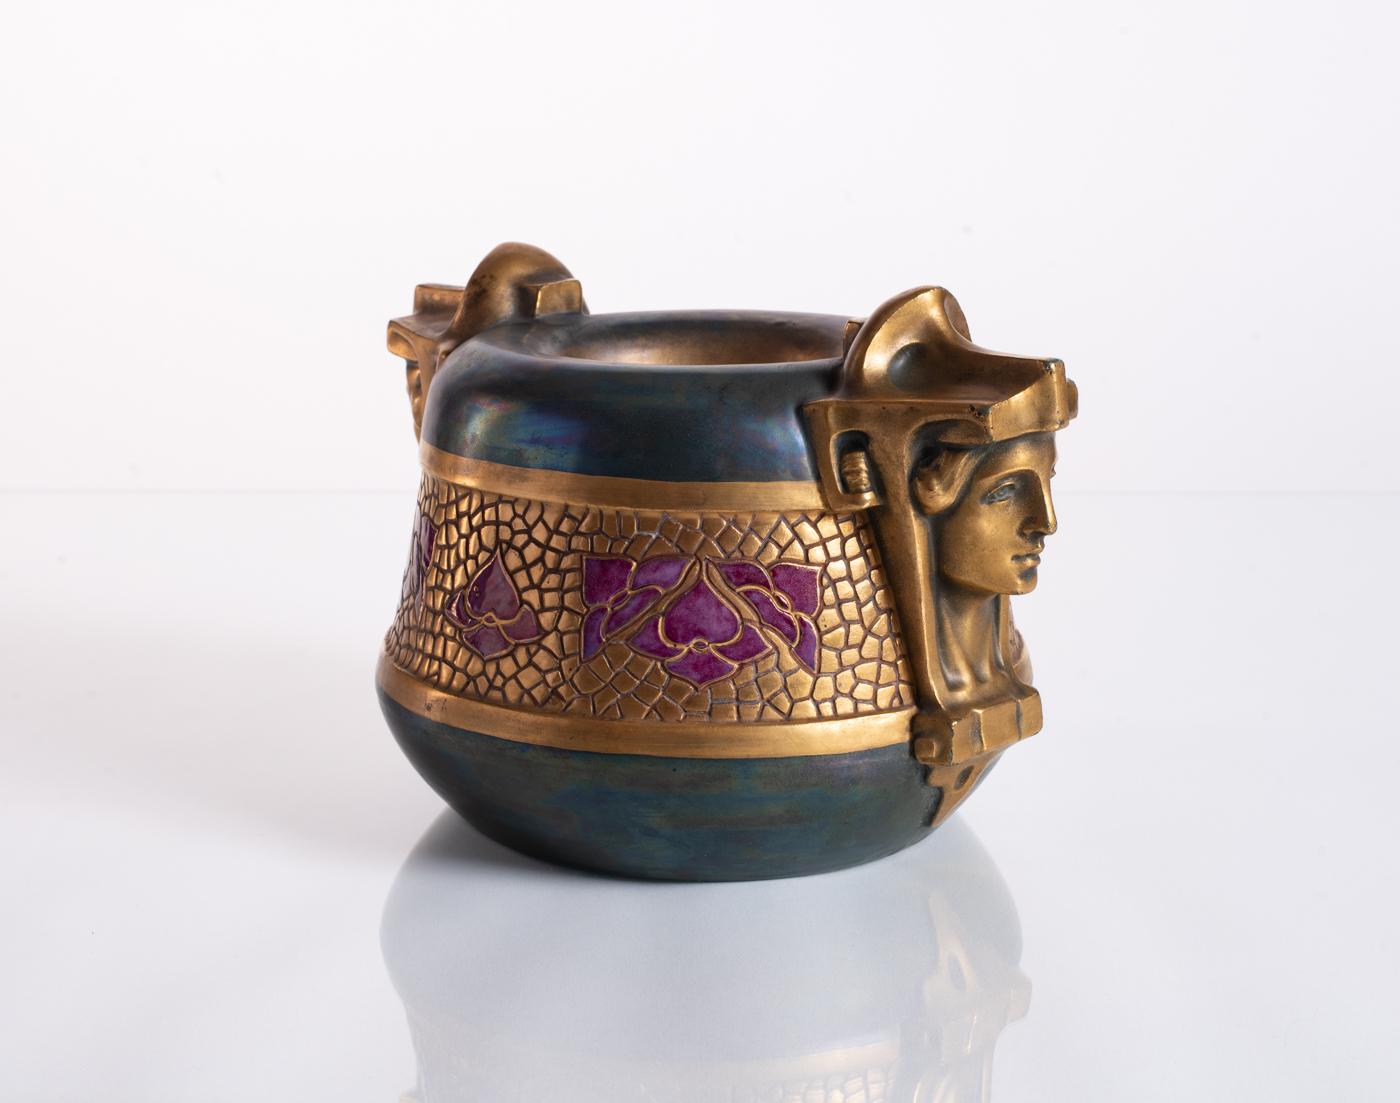 Art Nouveau Egyptian Sphinx Bowl by Ernst-Wahliss c. 1900 For Sale 1